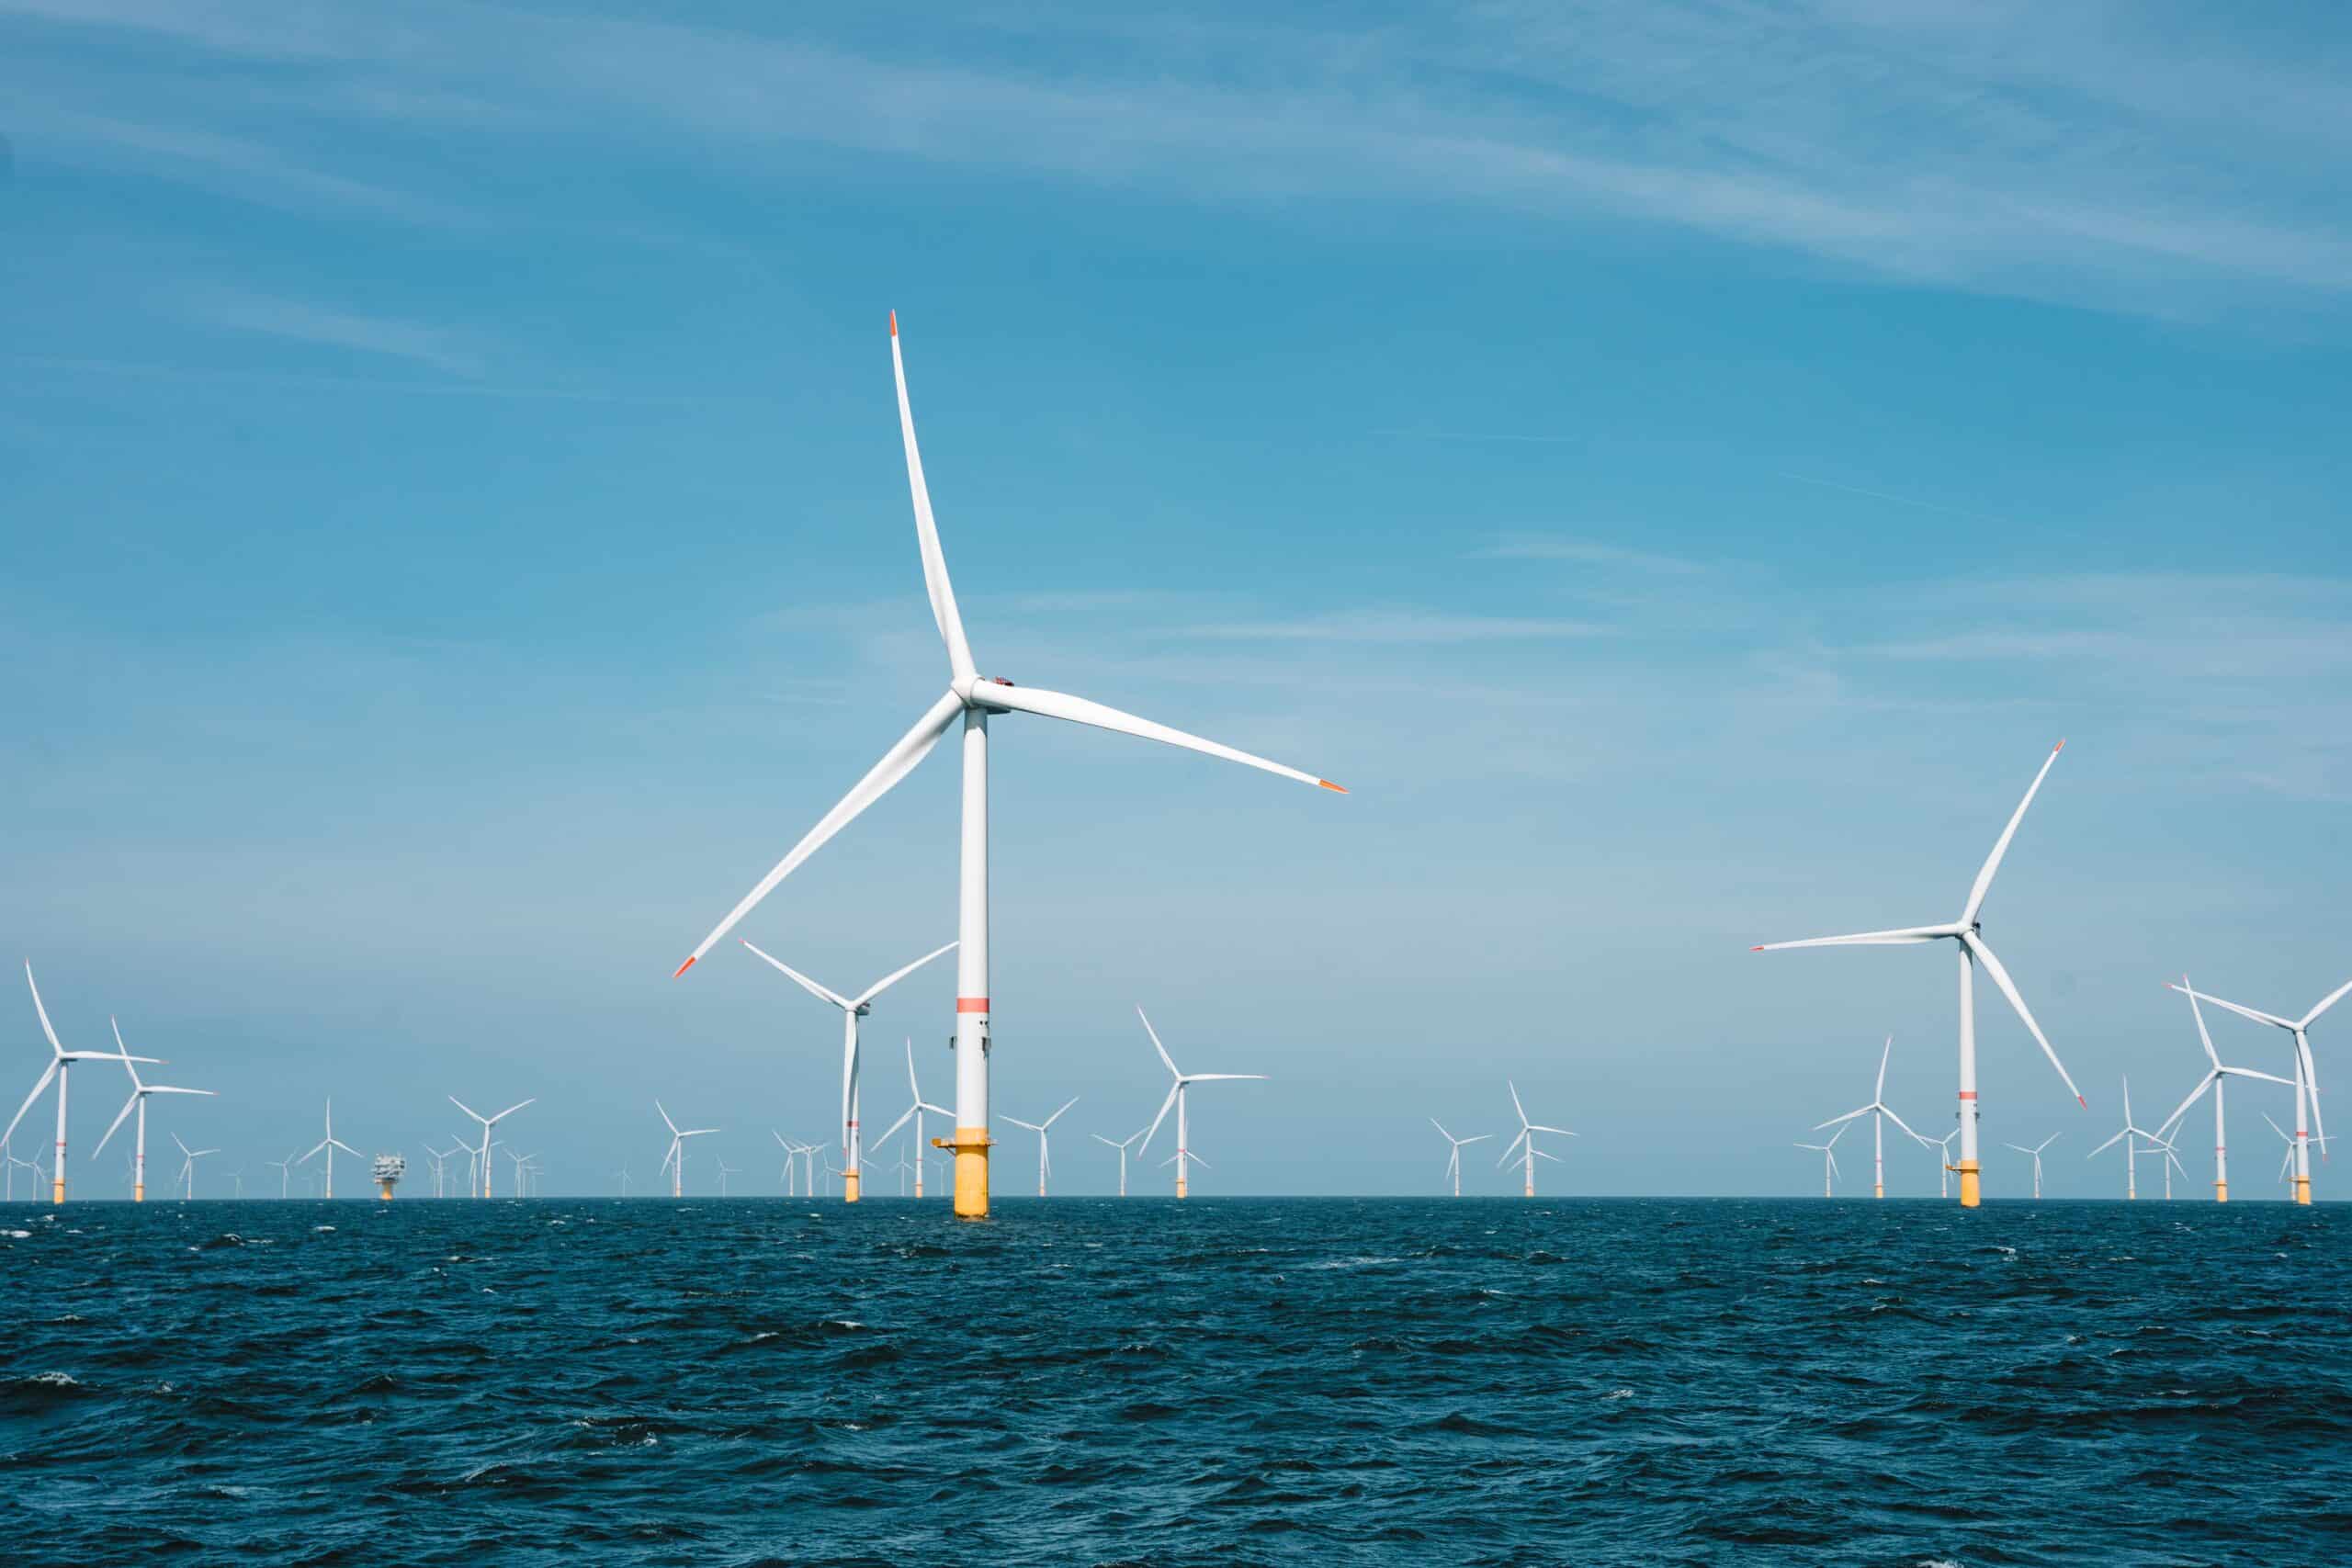 A field of wind turbines in the North Sea